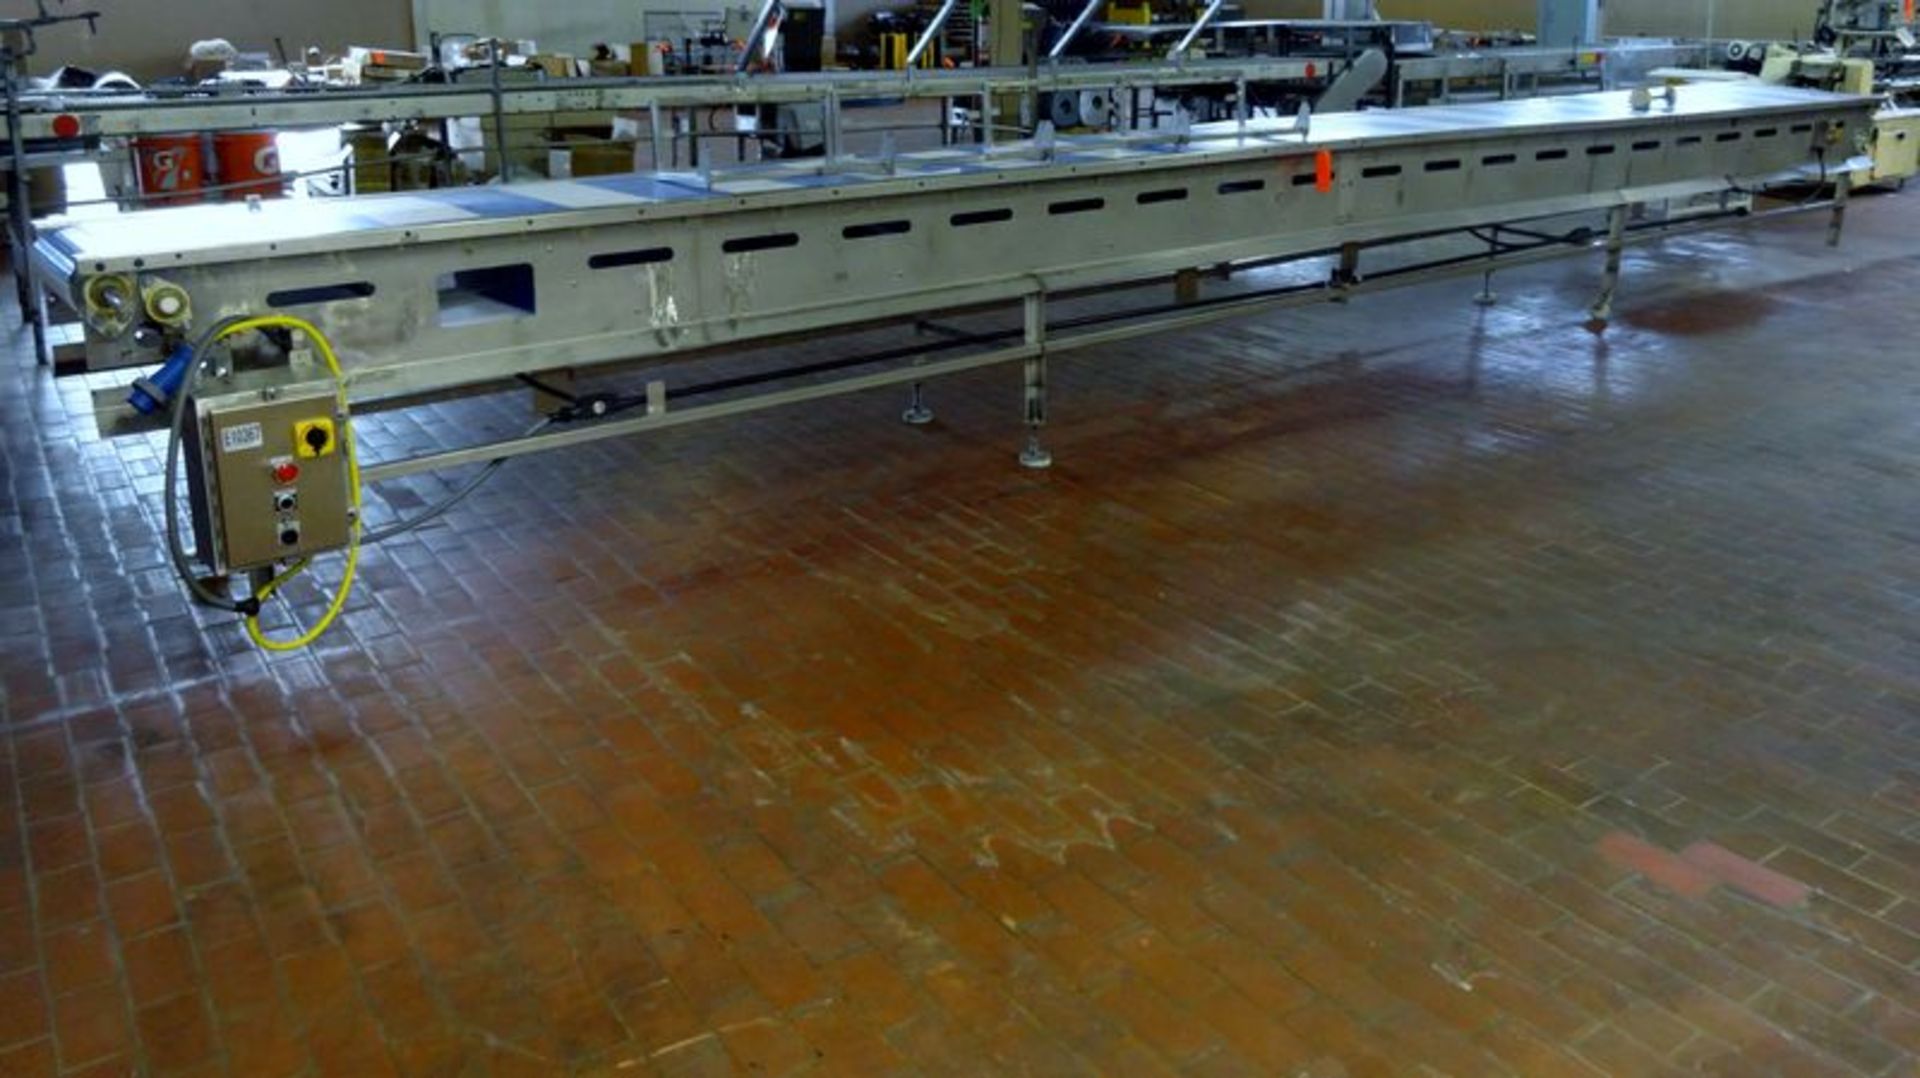 E-Quip plastic belt conveyor. Approximate 24" wide x 30' long. Stainless steel frame, no motor.